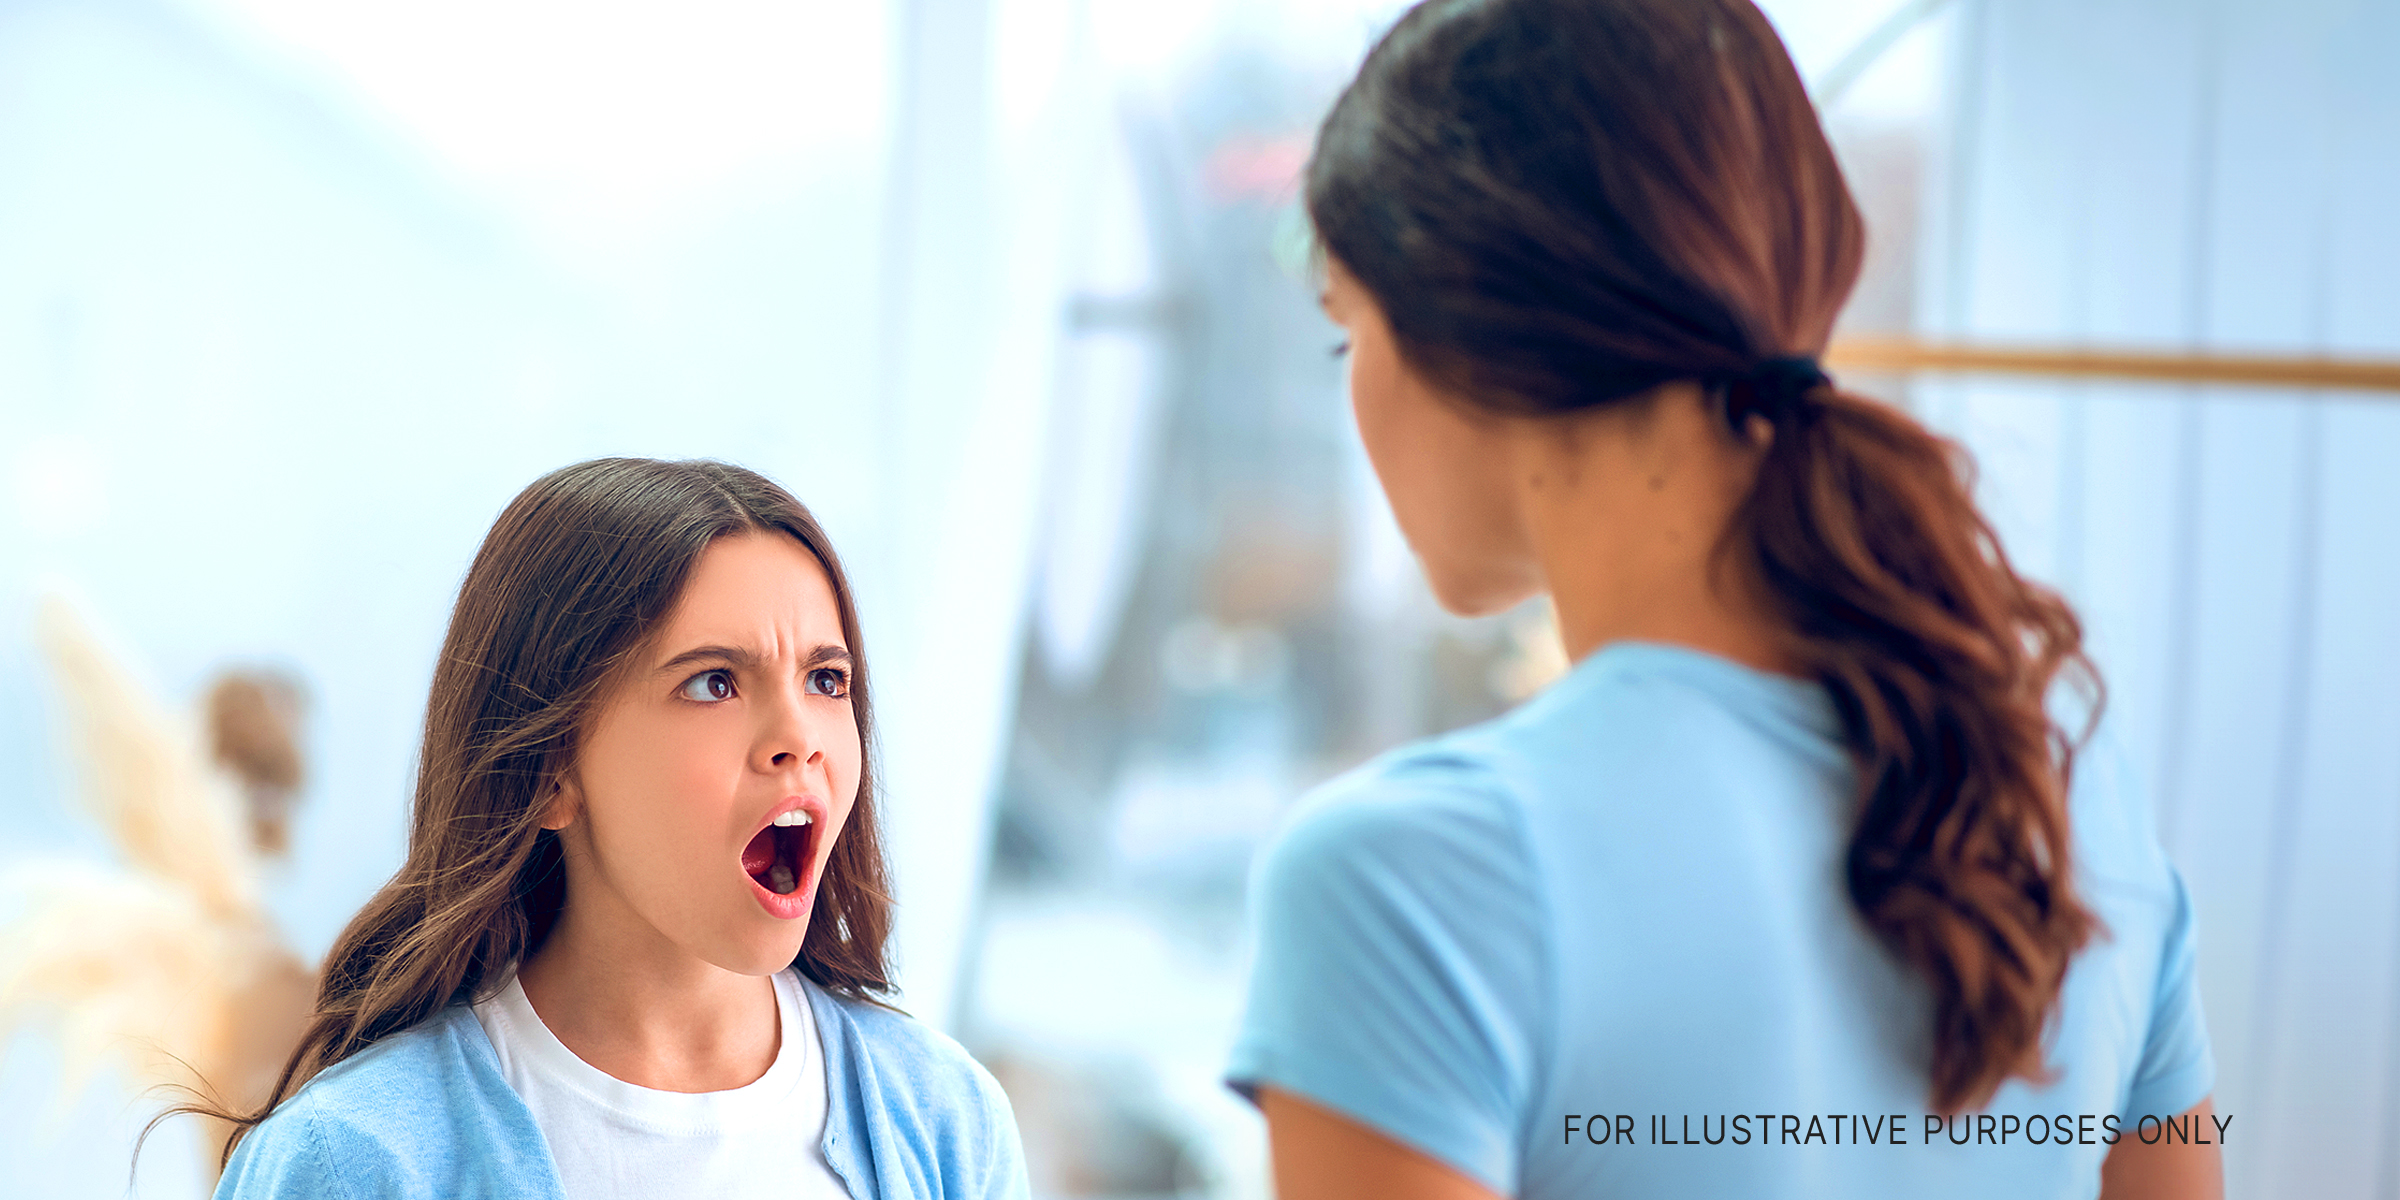 A teenage girl is seen screaming at the woman standing in front of her | Source: Shutterstock